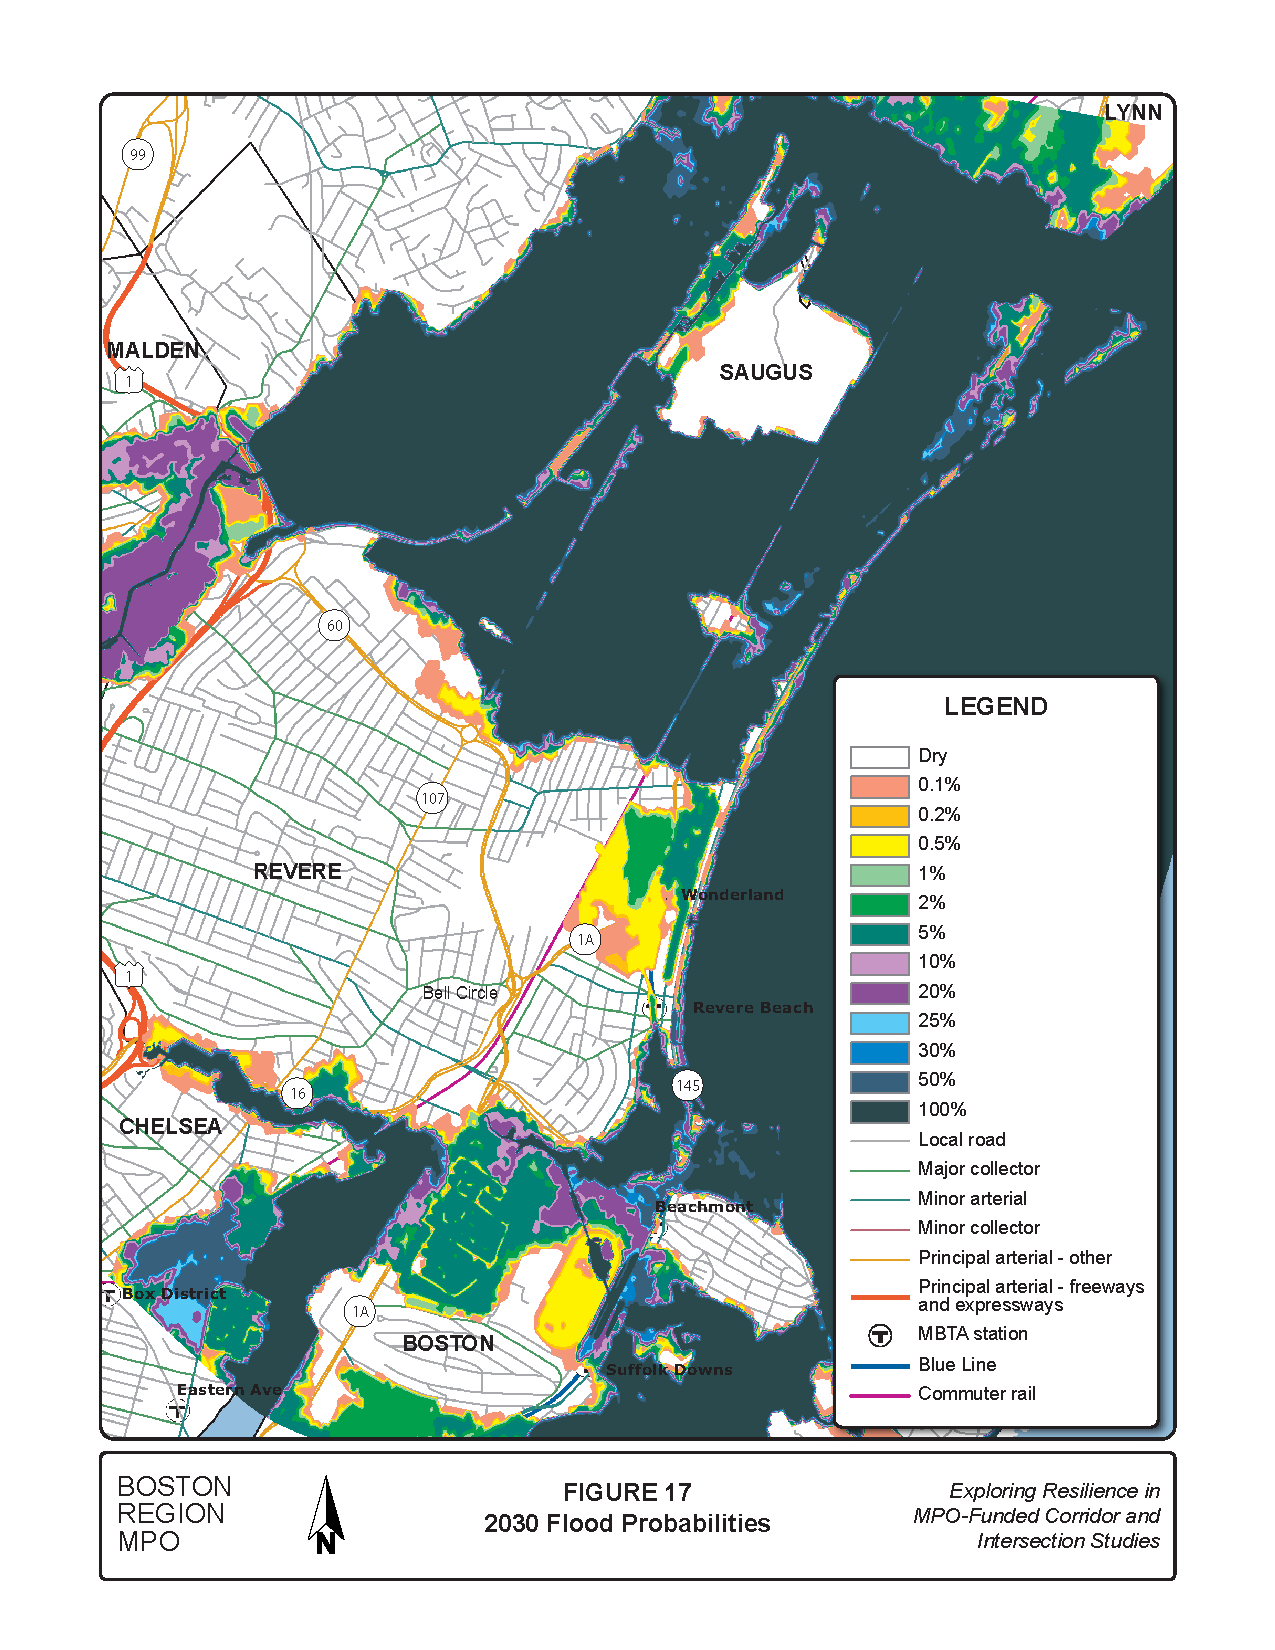 Figure 17 is a map of the study area showing the flood risk probabilities for 2030.